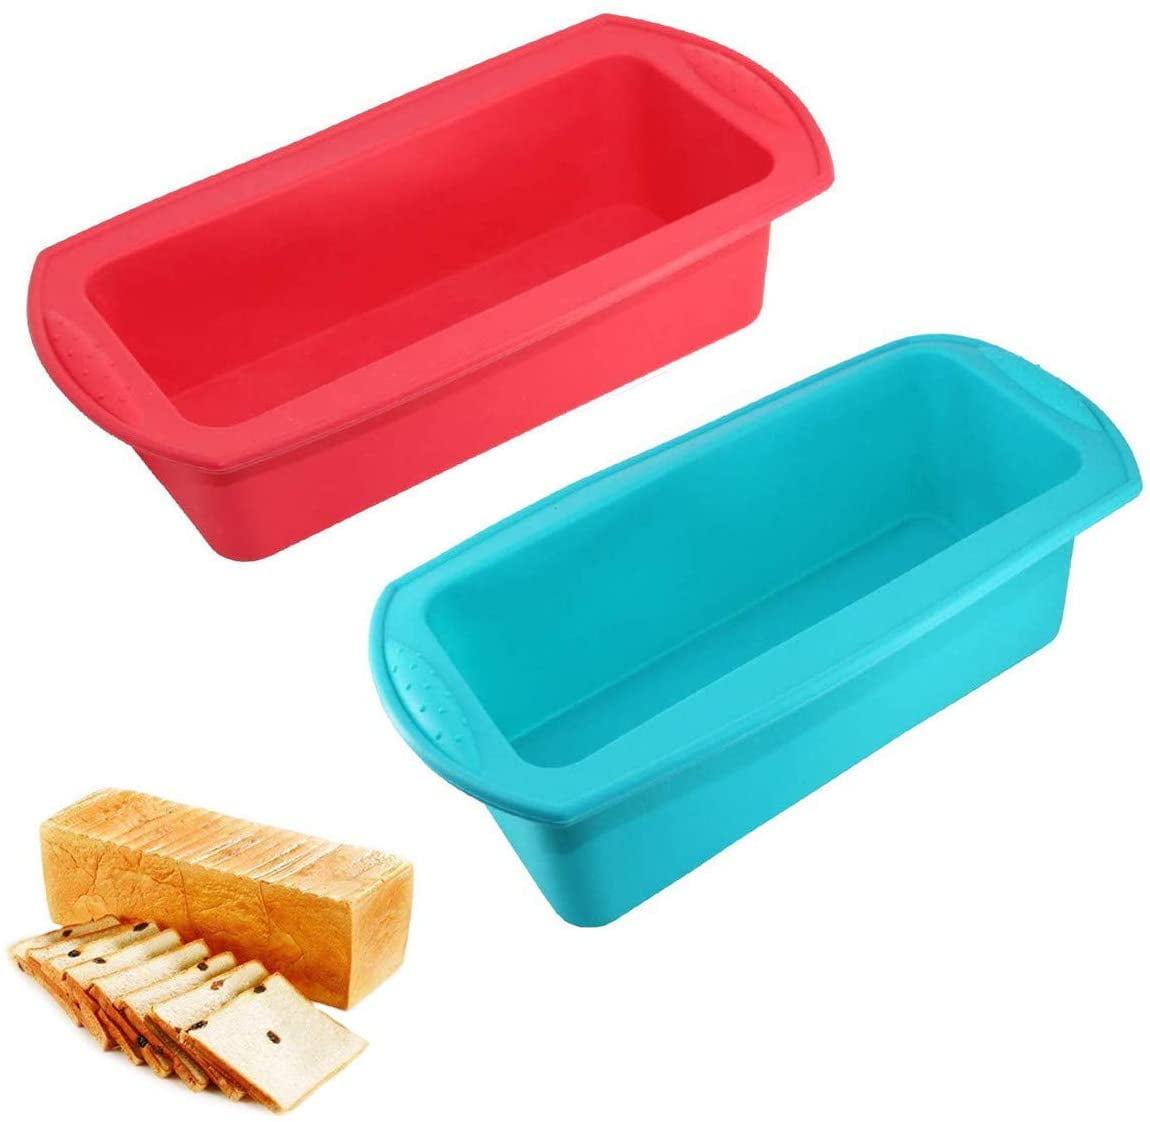 KEYFIVE 2 Pack Silicone Bread Pans For Baking, 9x5 Inch Silicone Loaf Pans,  Nonstick Silicone Molds for Homemade Bread, Meatloaf, Banana Bread